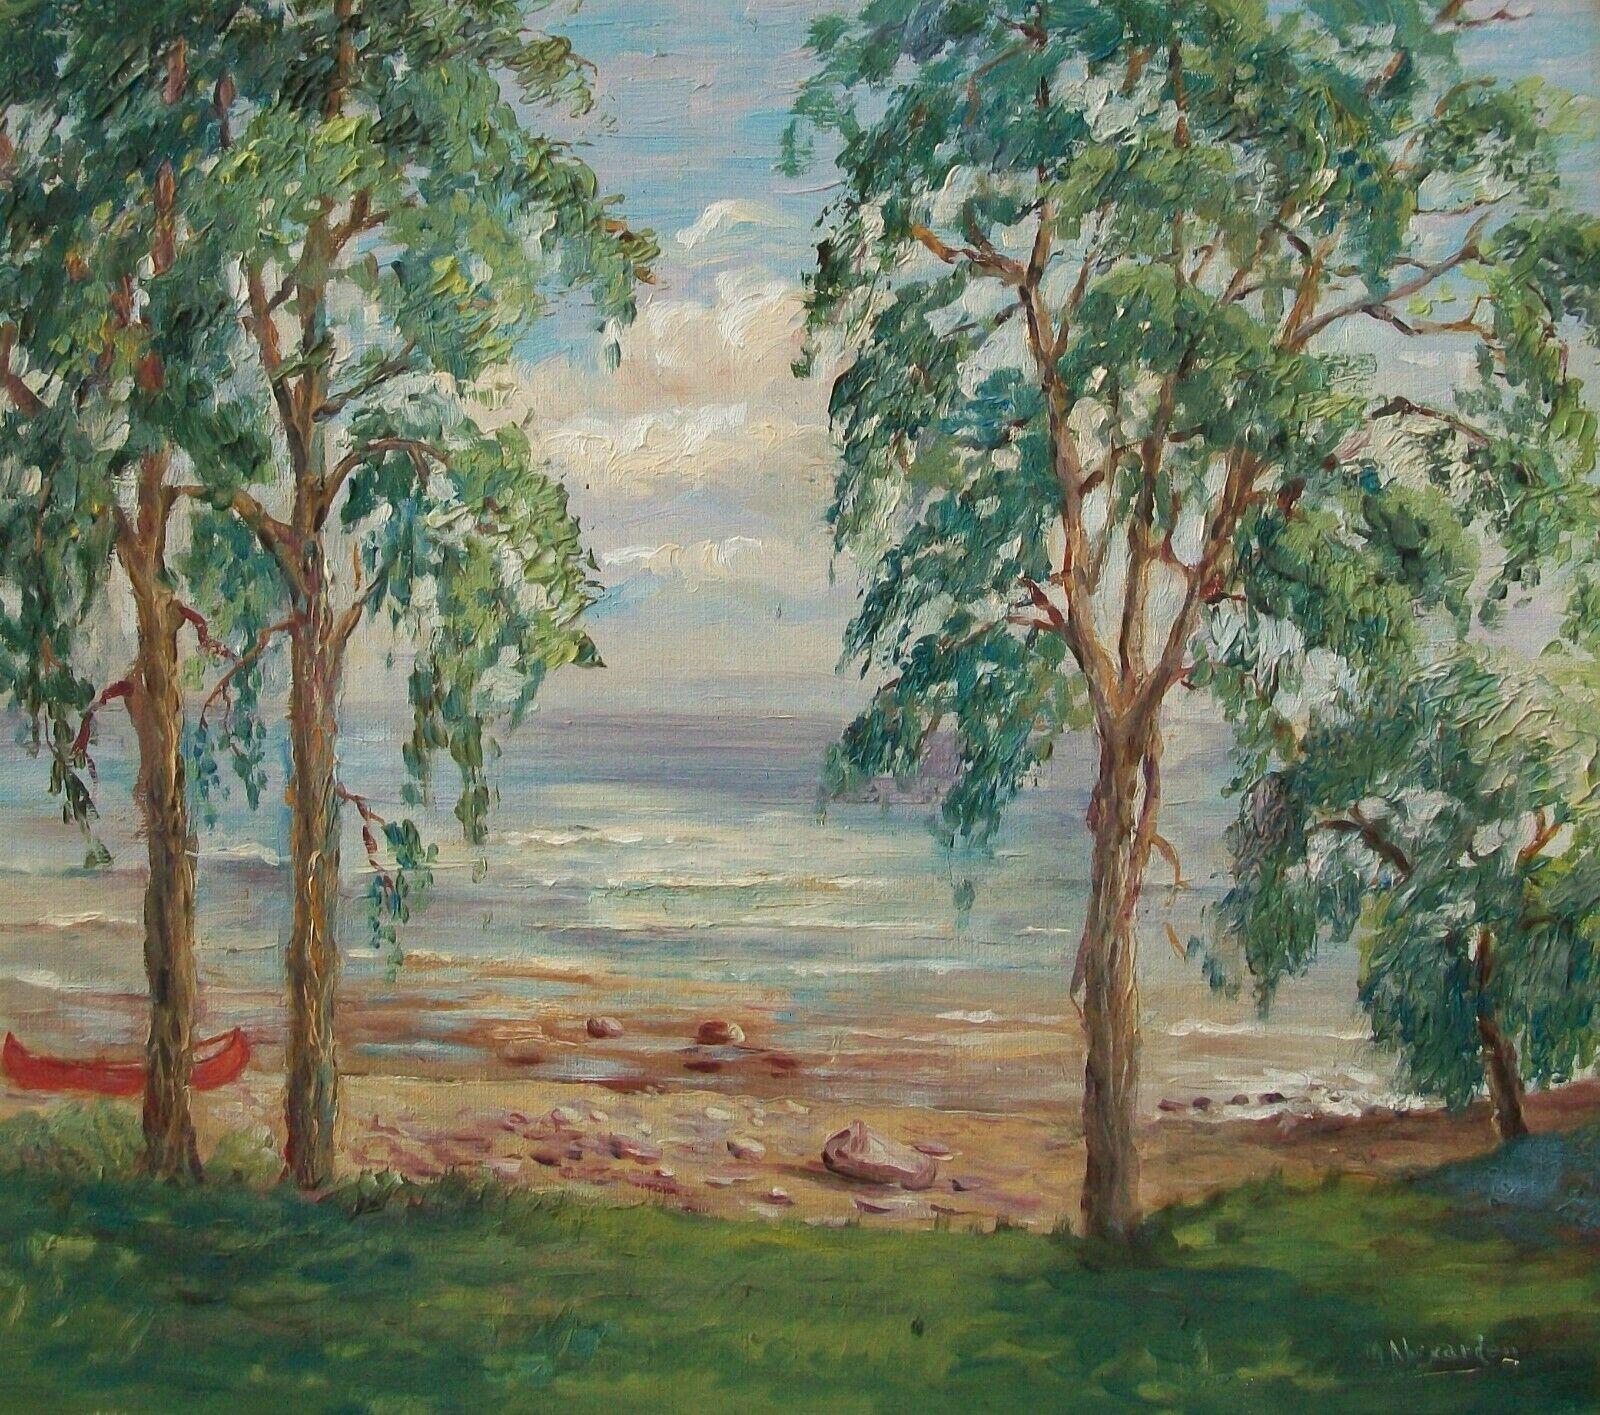 Wilhelmina 'Mina' Alexander (1871-1961) - 'Along the Shore Lake Ontario' - Impressionist landscape oil painting on canvas (mounted to panel) - antique original giltwood frame with glass liner - signed lower right - Canada - early 20th